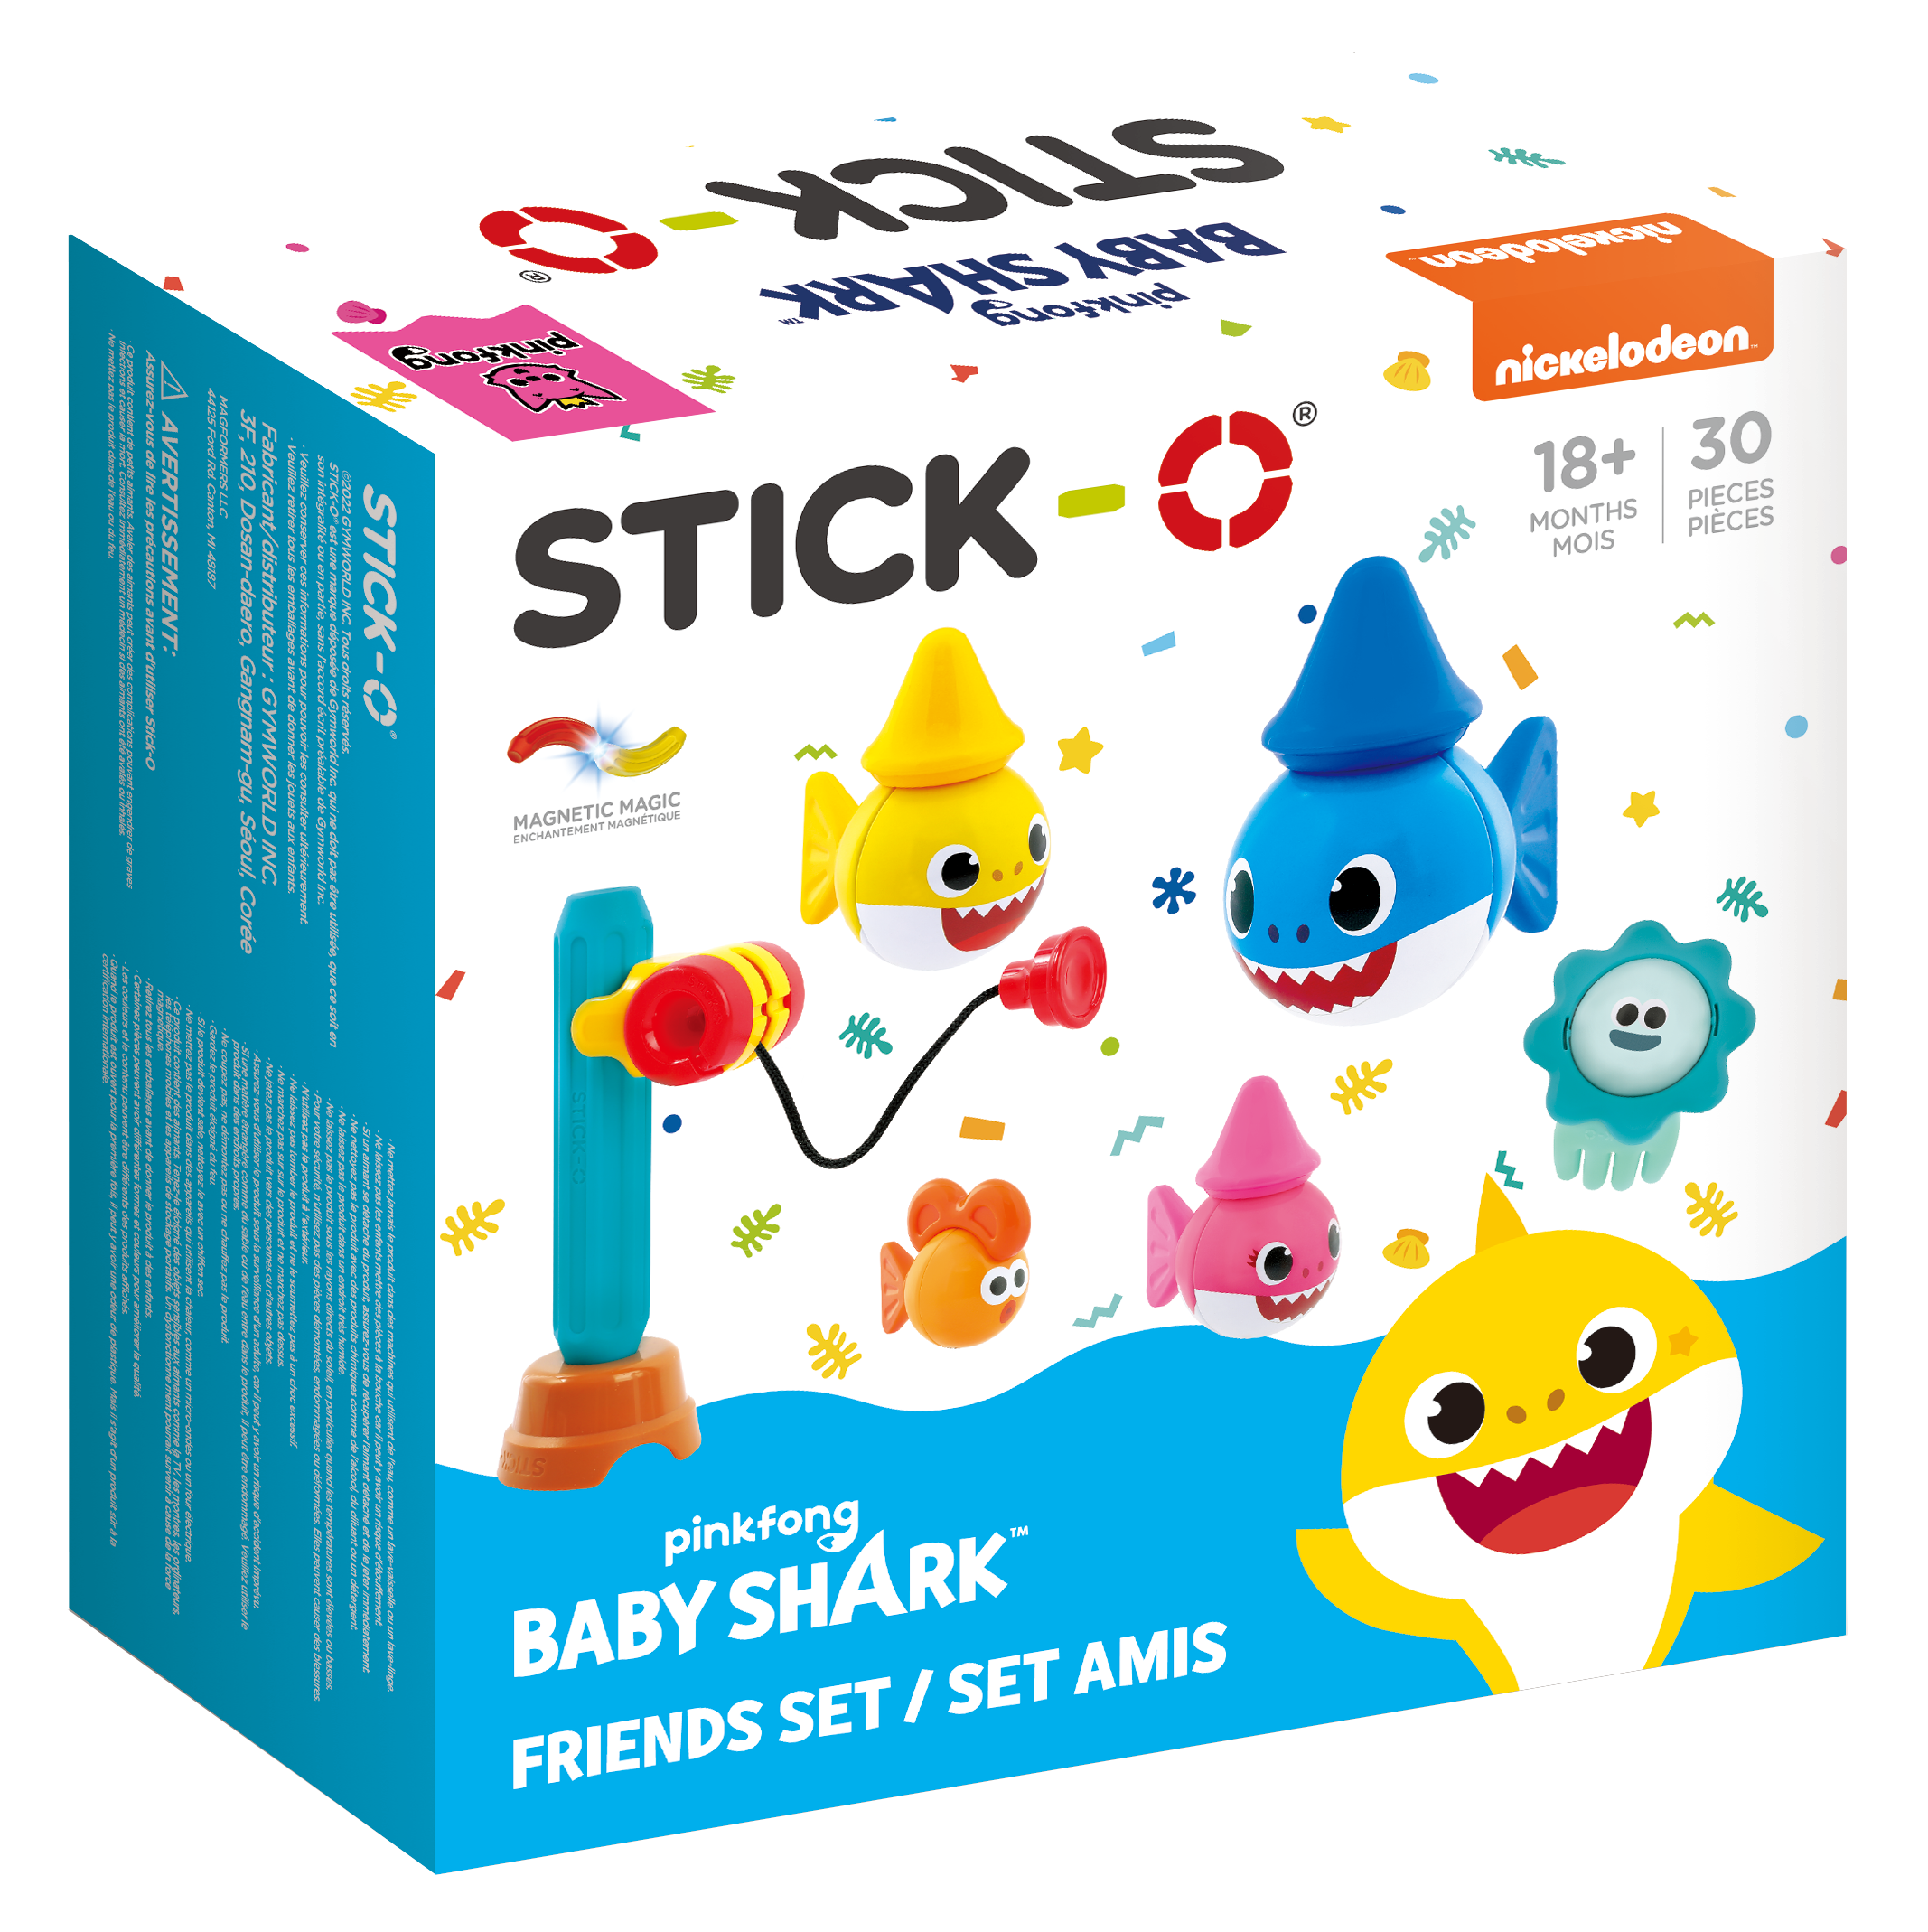 Stick-O Baby Shark Family 17 Piece Magnetic Building Set, Rainbow Colors,  Educational STEM Construction toy Ages 18M+ – Magformers US